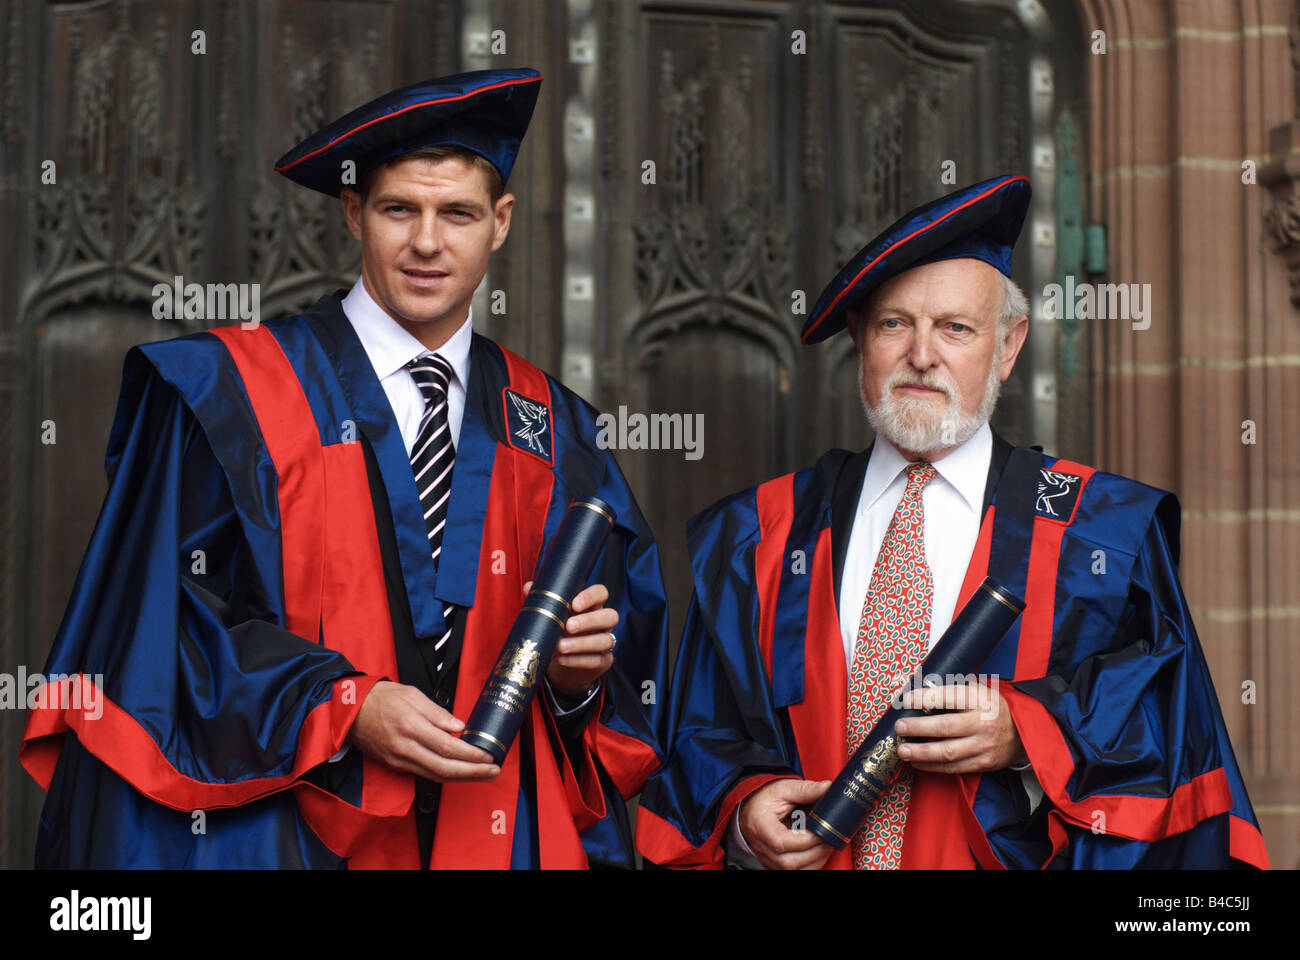 Steven Gerrard with Richard Stilgoe, received an Honorary Fellowship from Liverpool John Moores University. Stock Photo